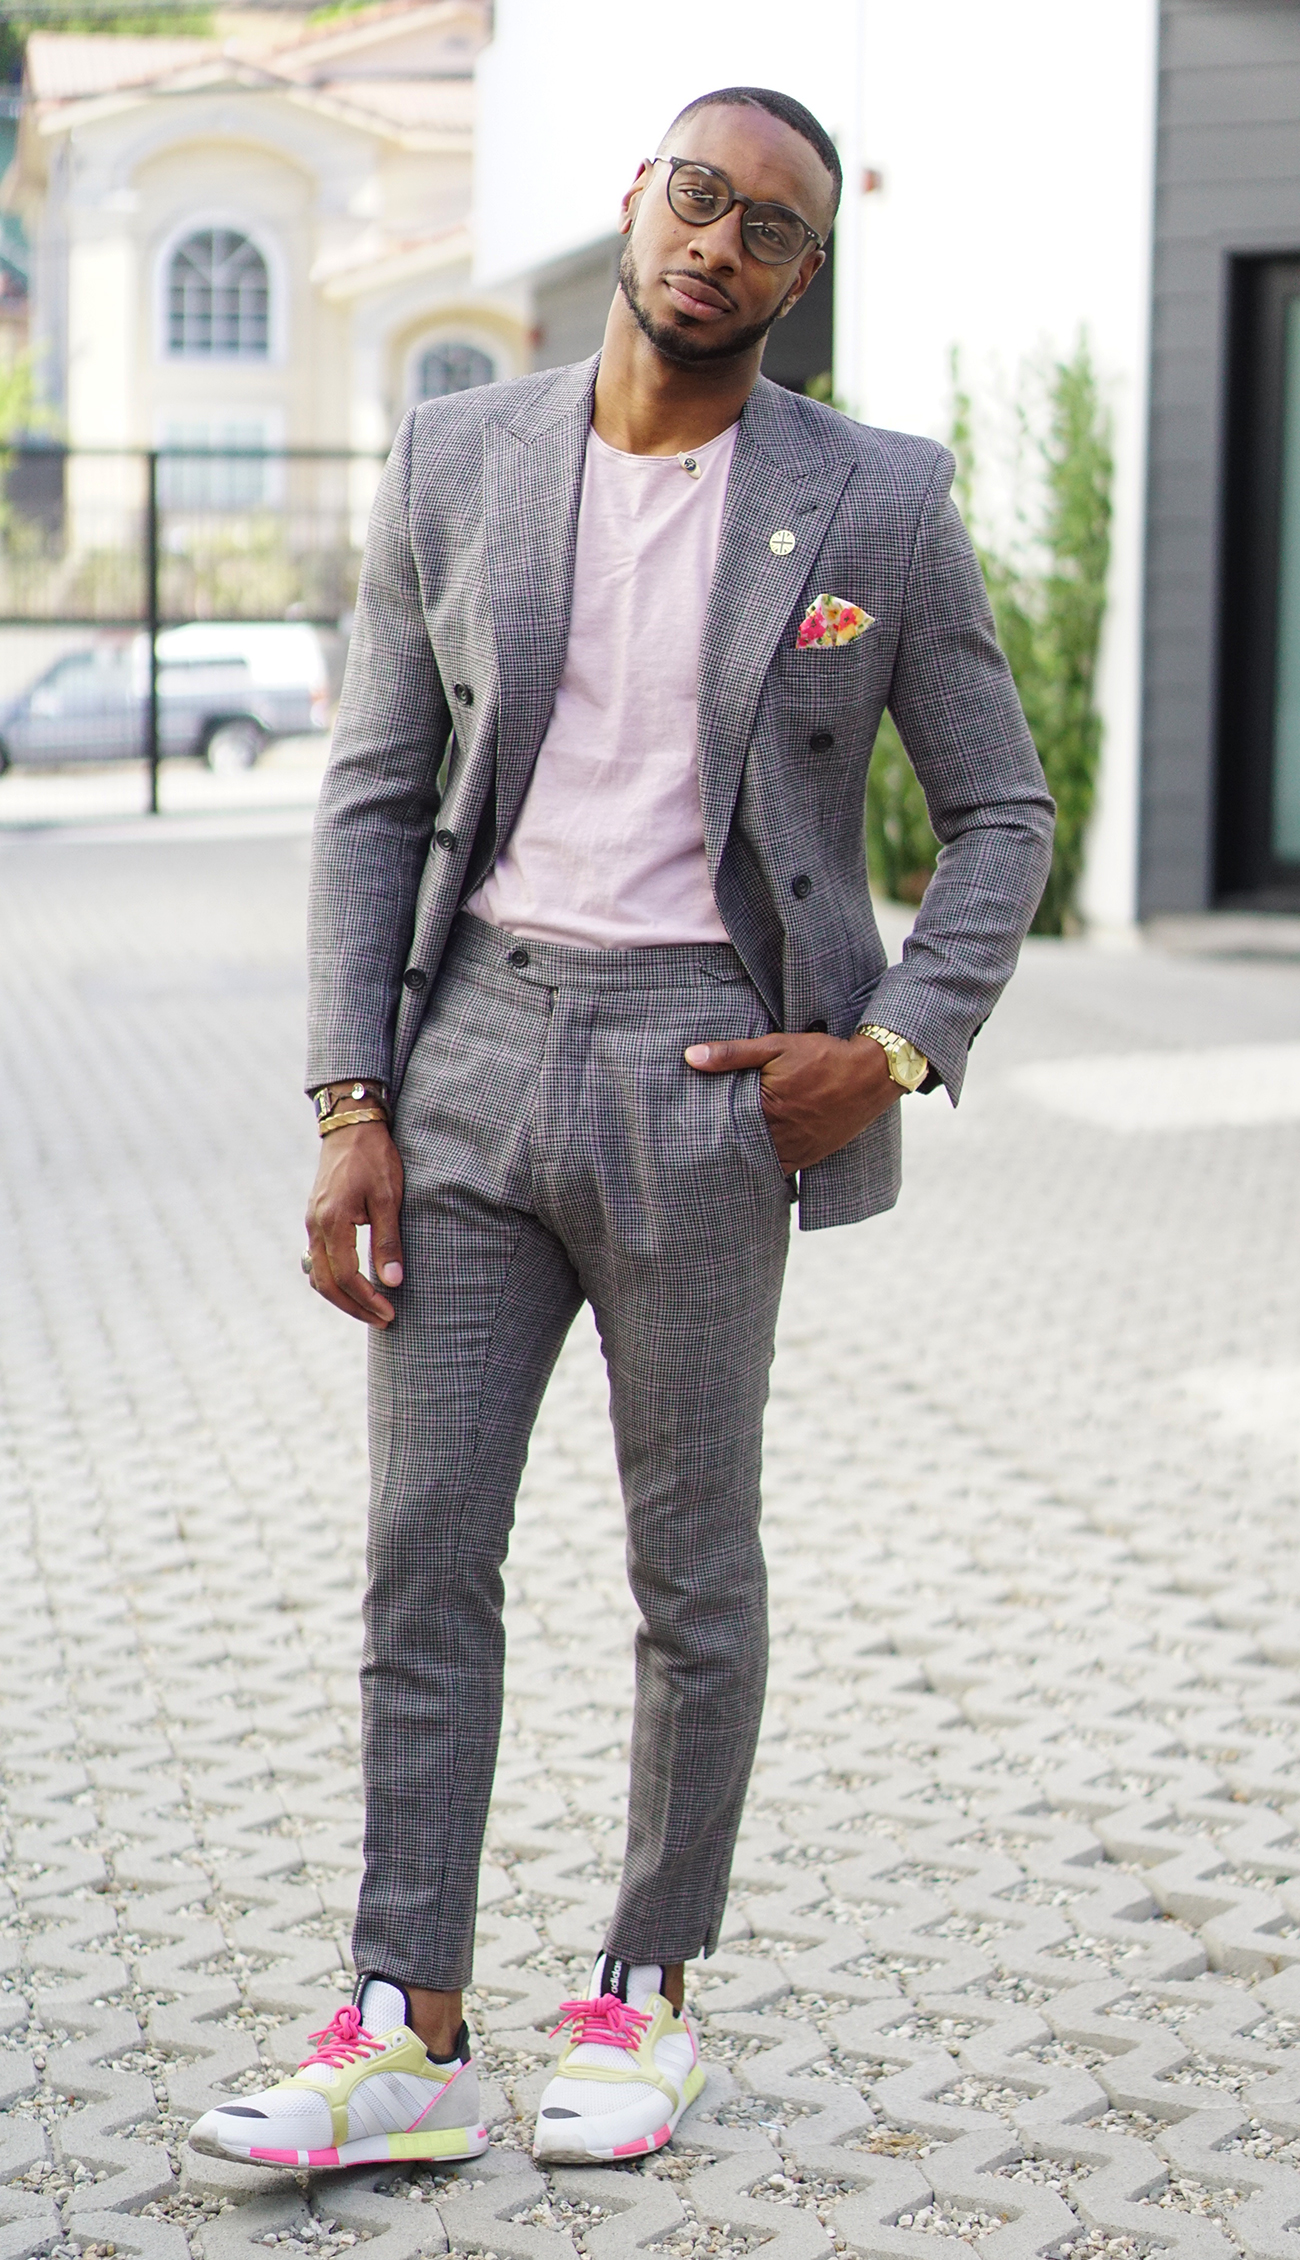 OOTD: ROCKIN' SNEAKERS WITH A SUIT 